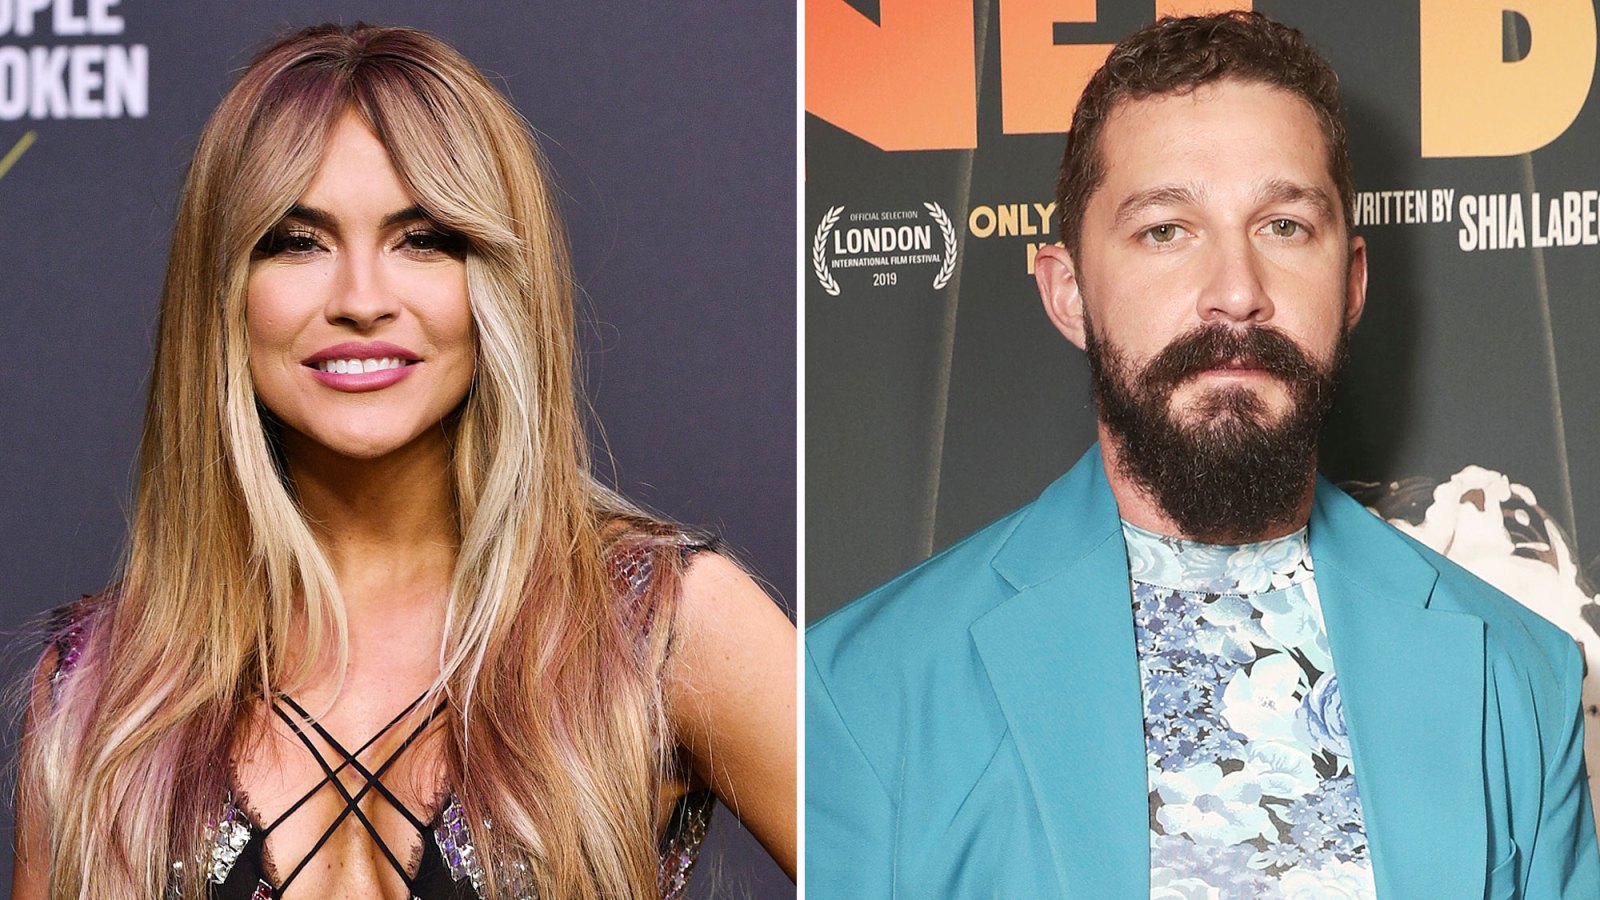 Why Chrishell Stause Isnt Thrilled About Shia LaBeouf Comeback Role